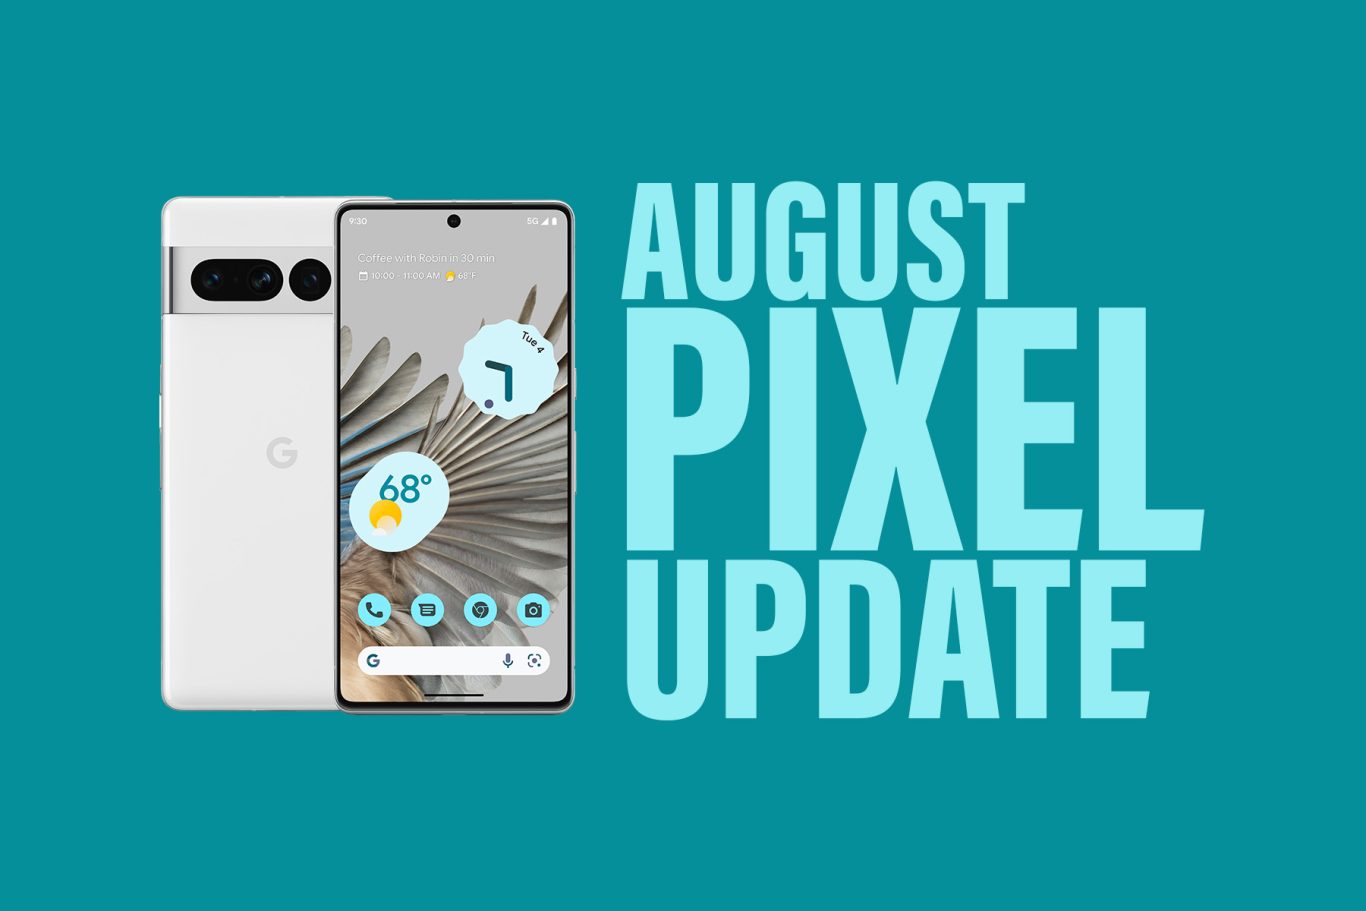 Your Google Pixel Phone's August Update Arrived